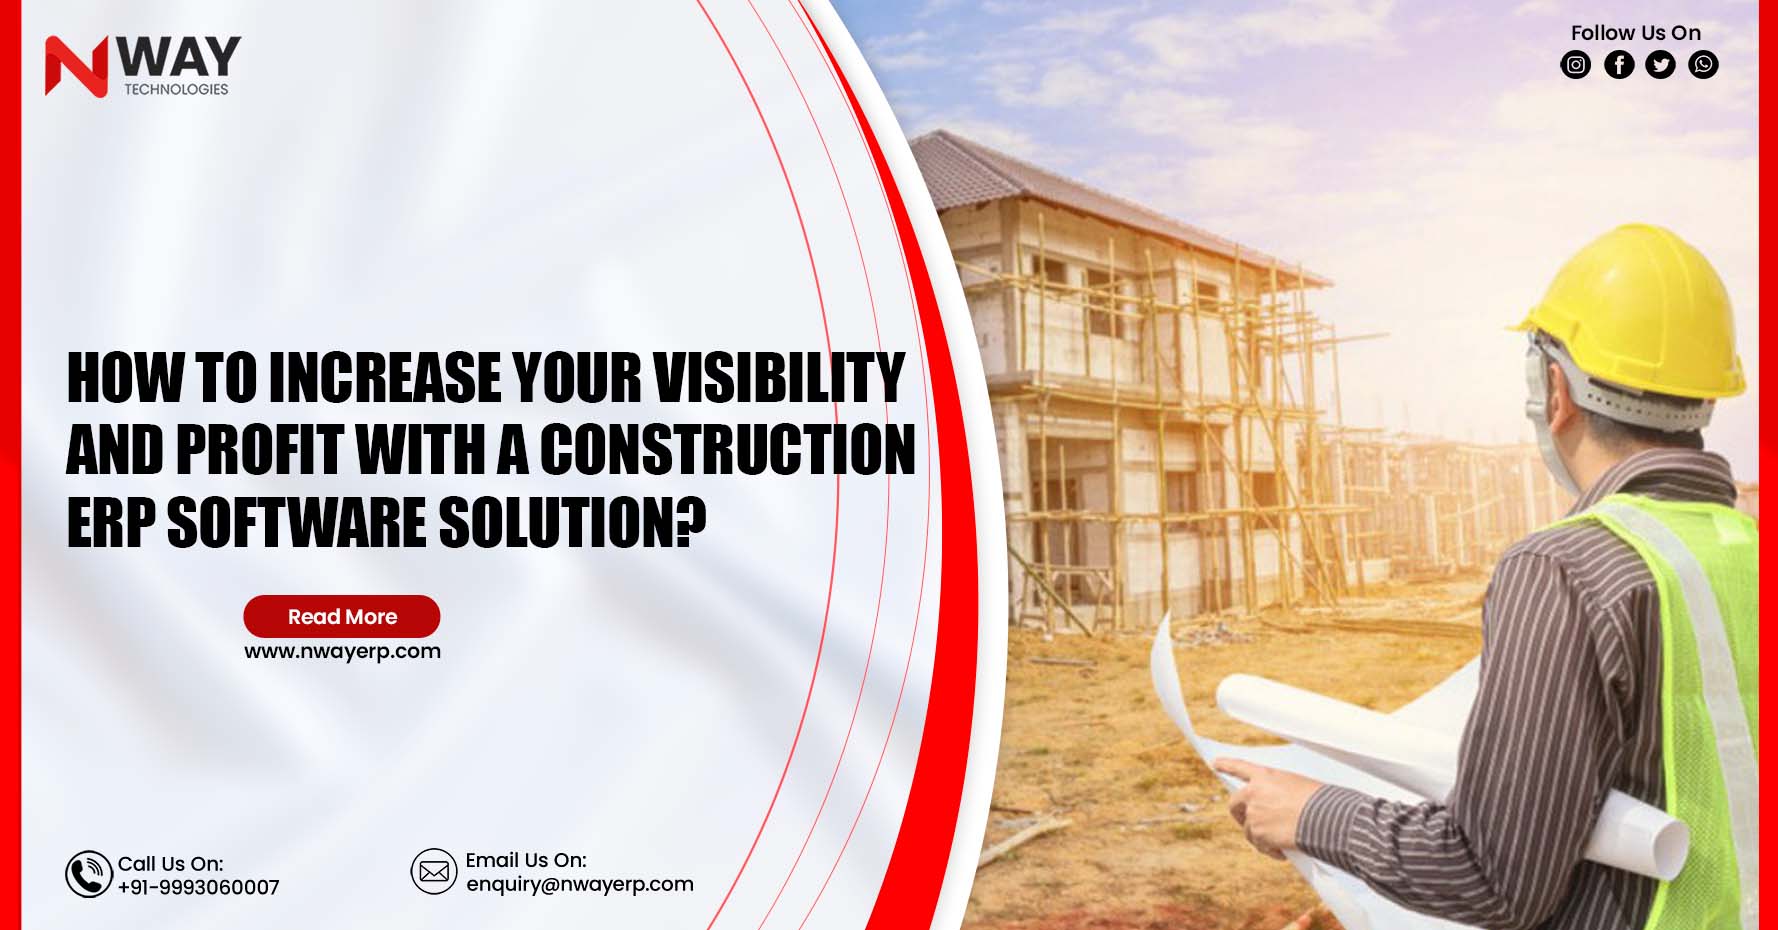 How to Increase Project Visibility and Profit with a Construction ERP Software Solution?